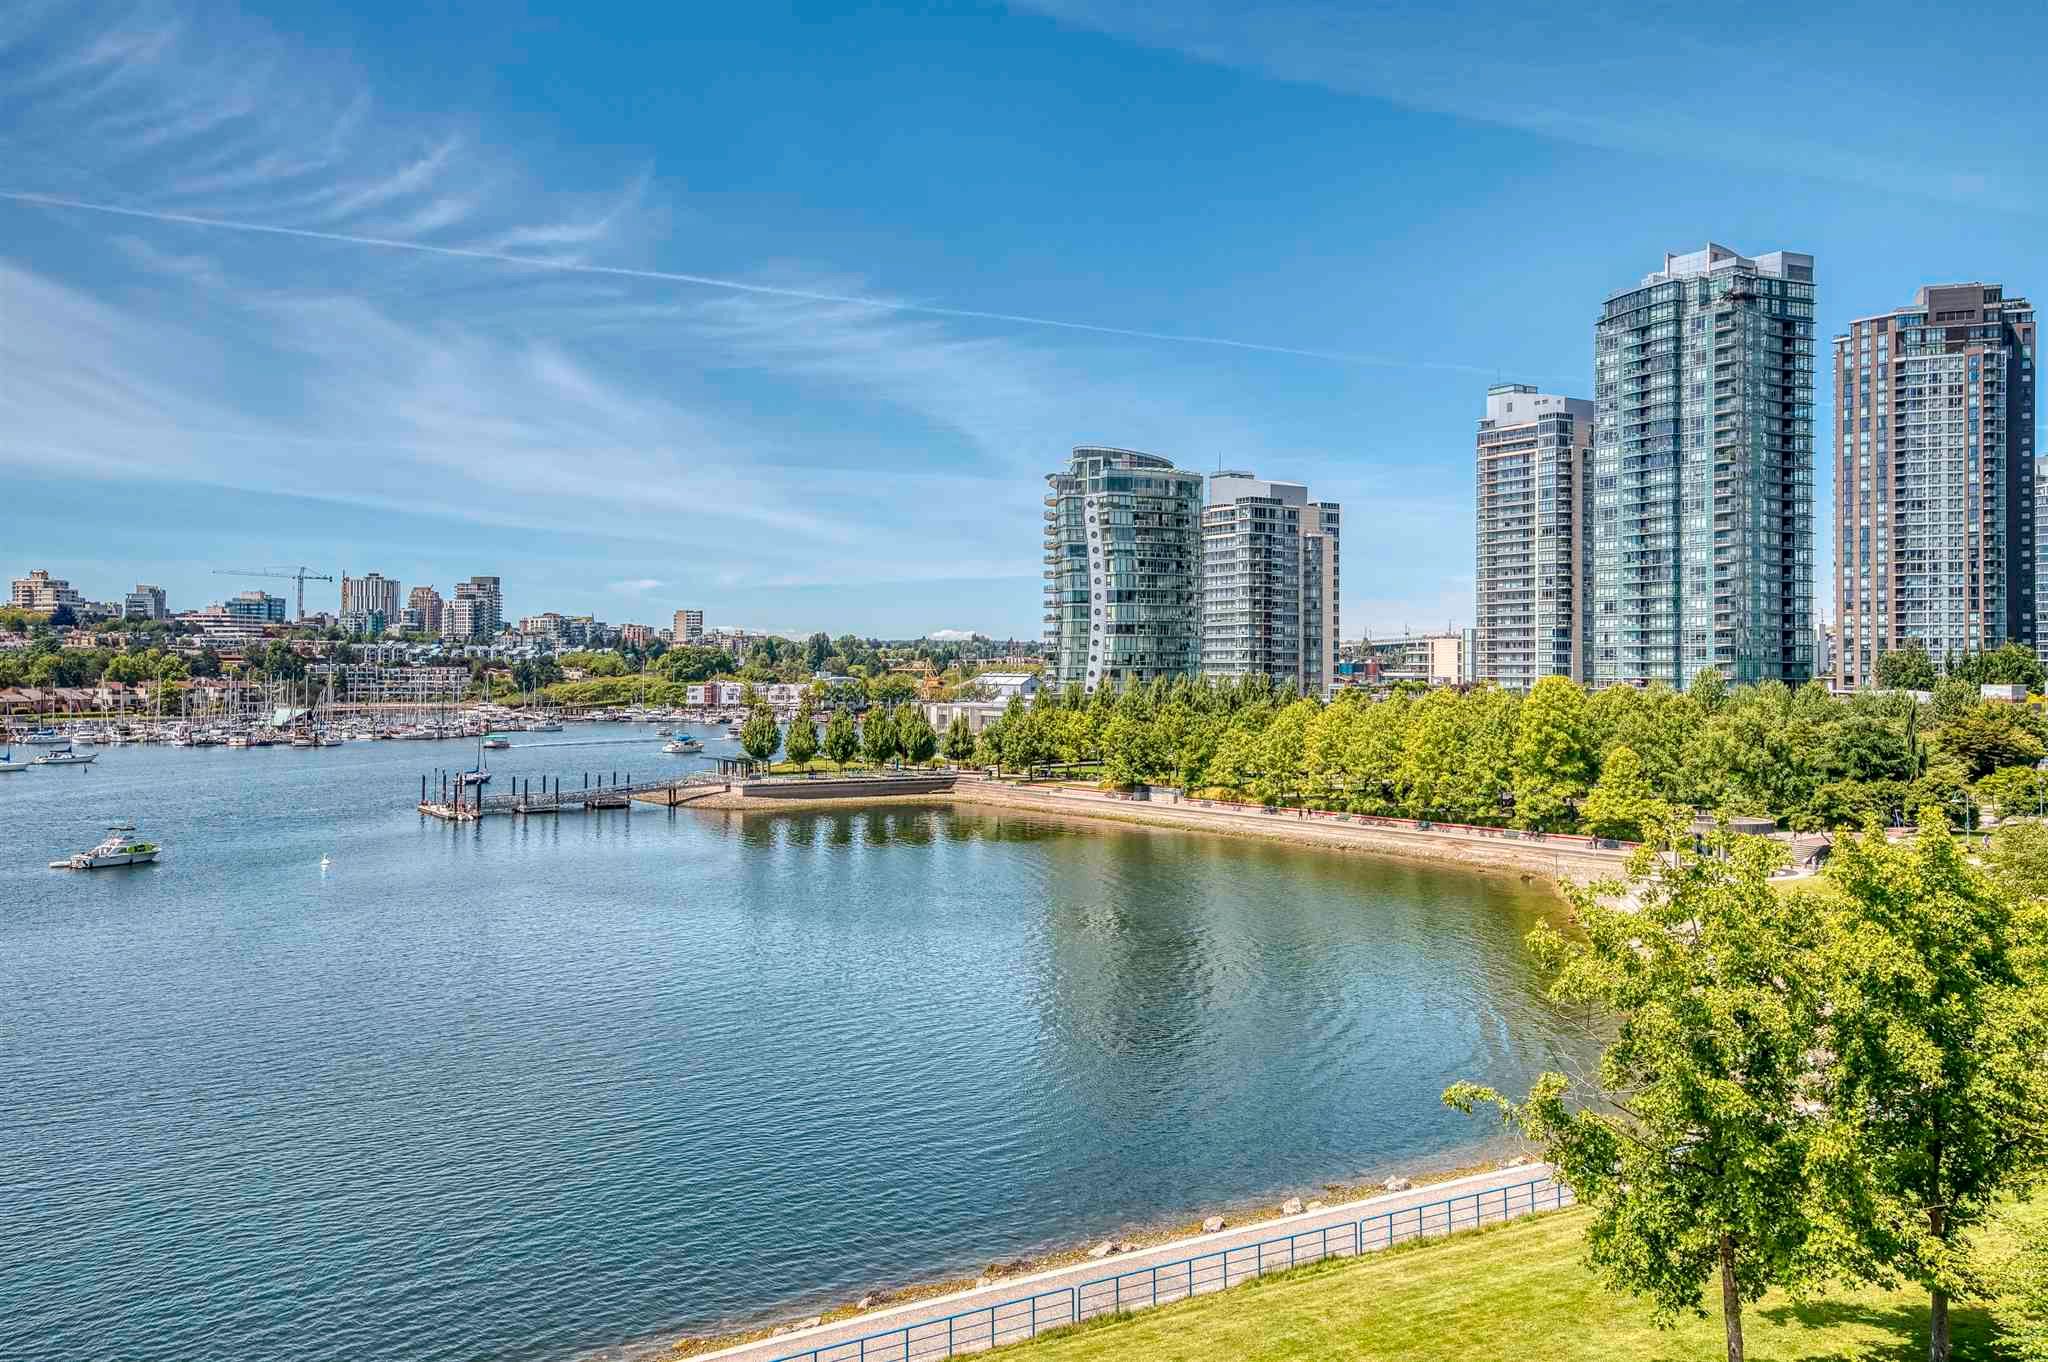 Main Photo: 705 1383 MARINASIDE CRESCENT in Vancouver: Yaletown Condo for sale (Vancouver West)  : MLS®# R2594508